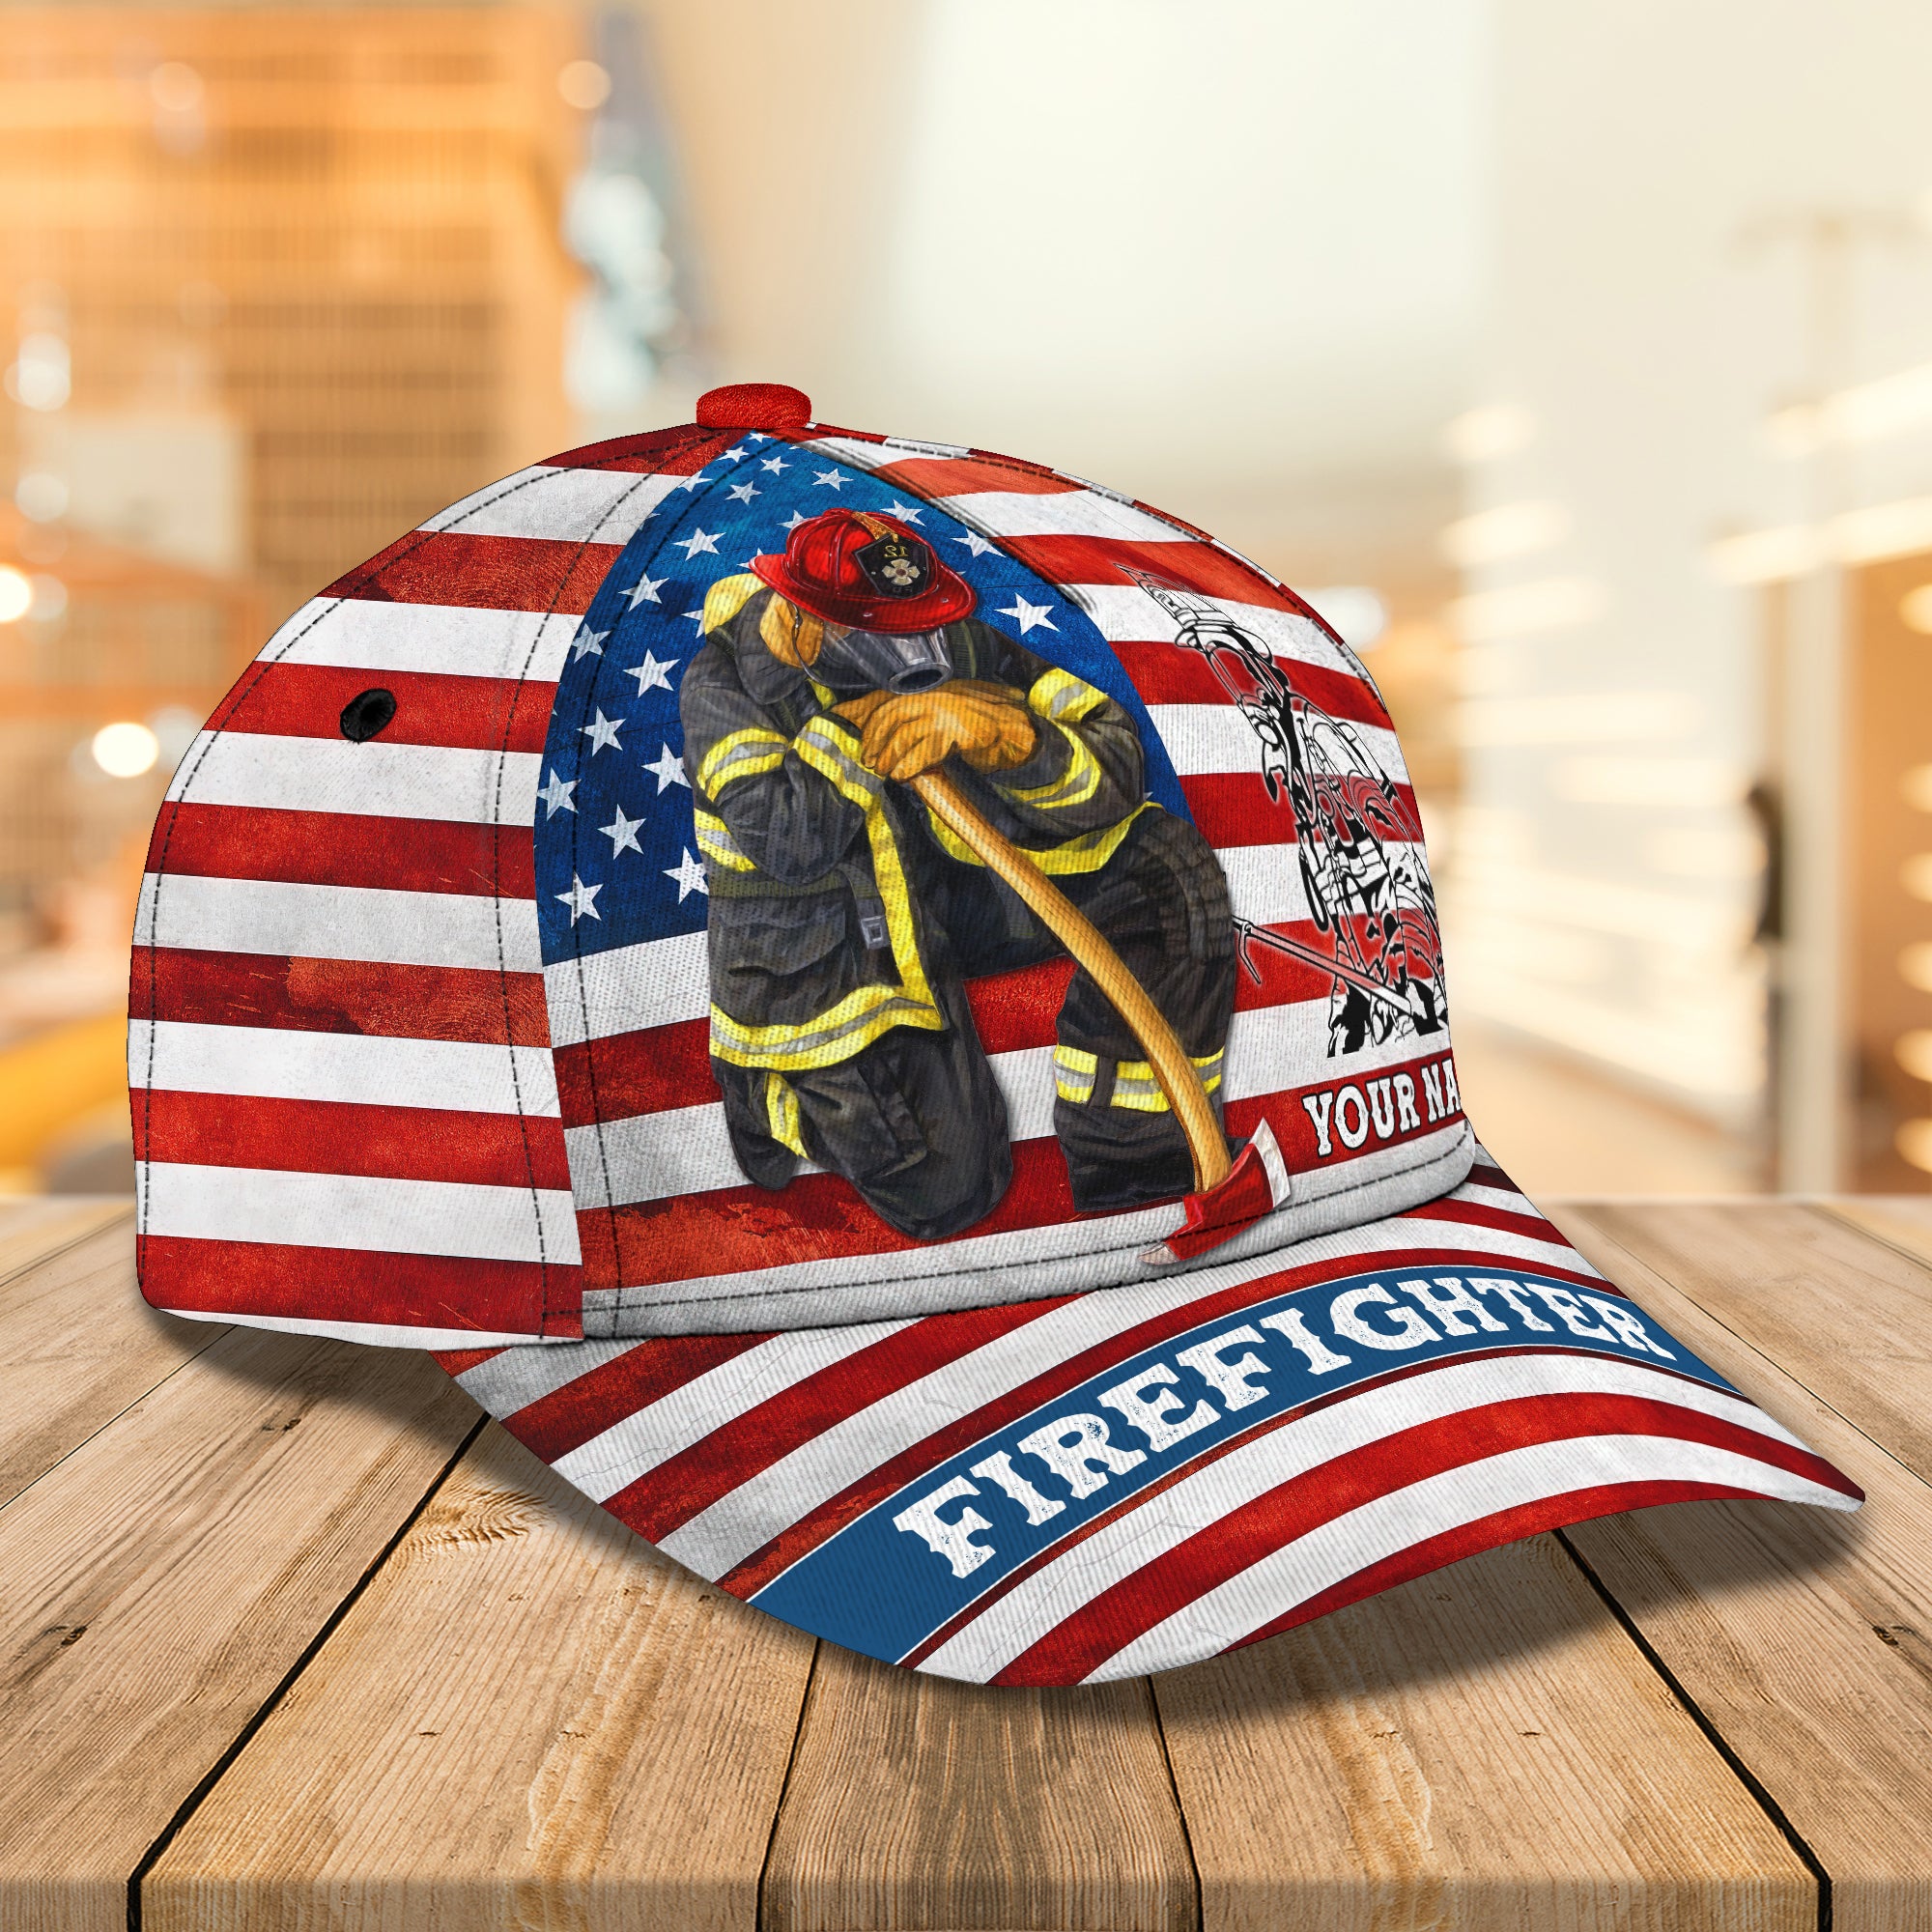 Firefighter - Personalized Name Cap - tra96